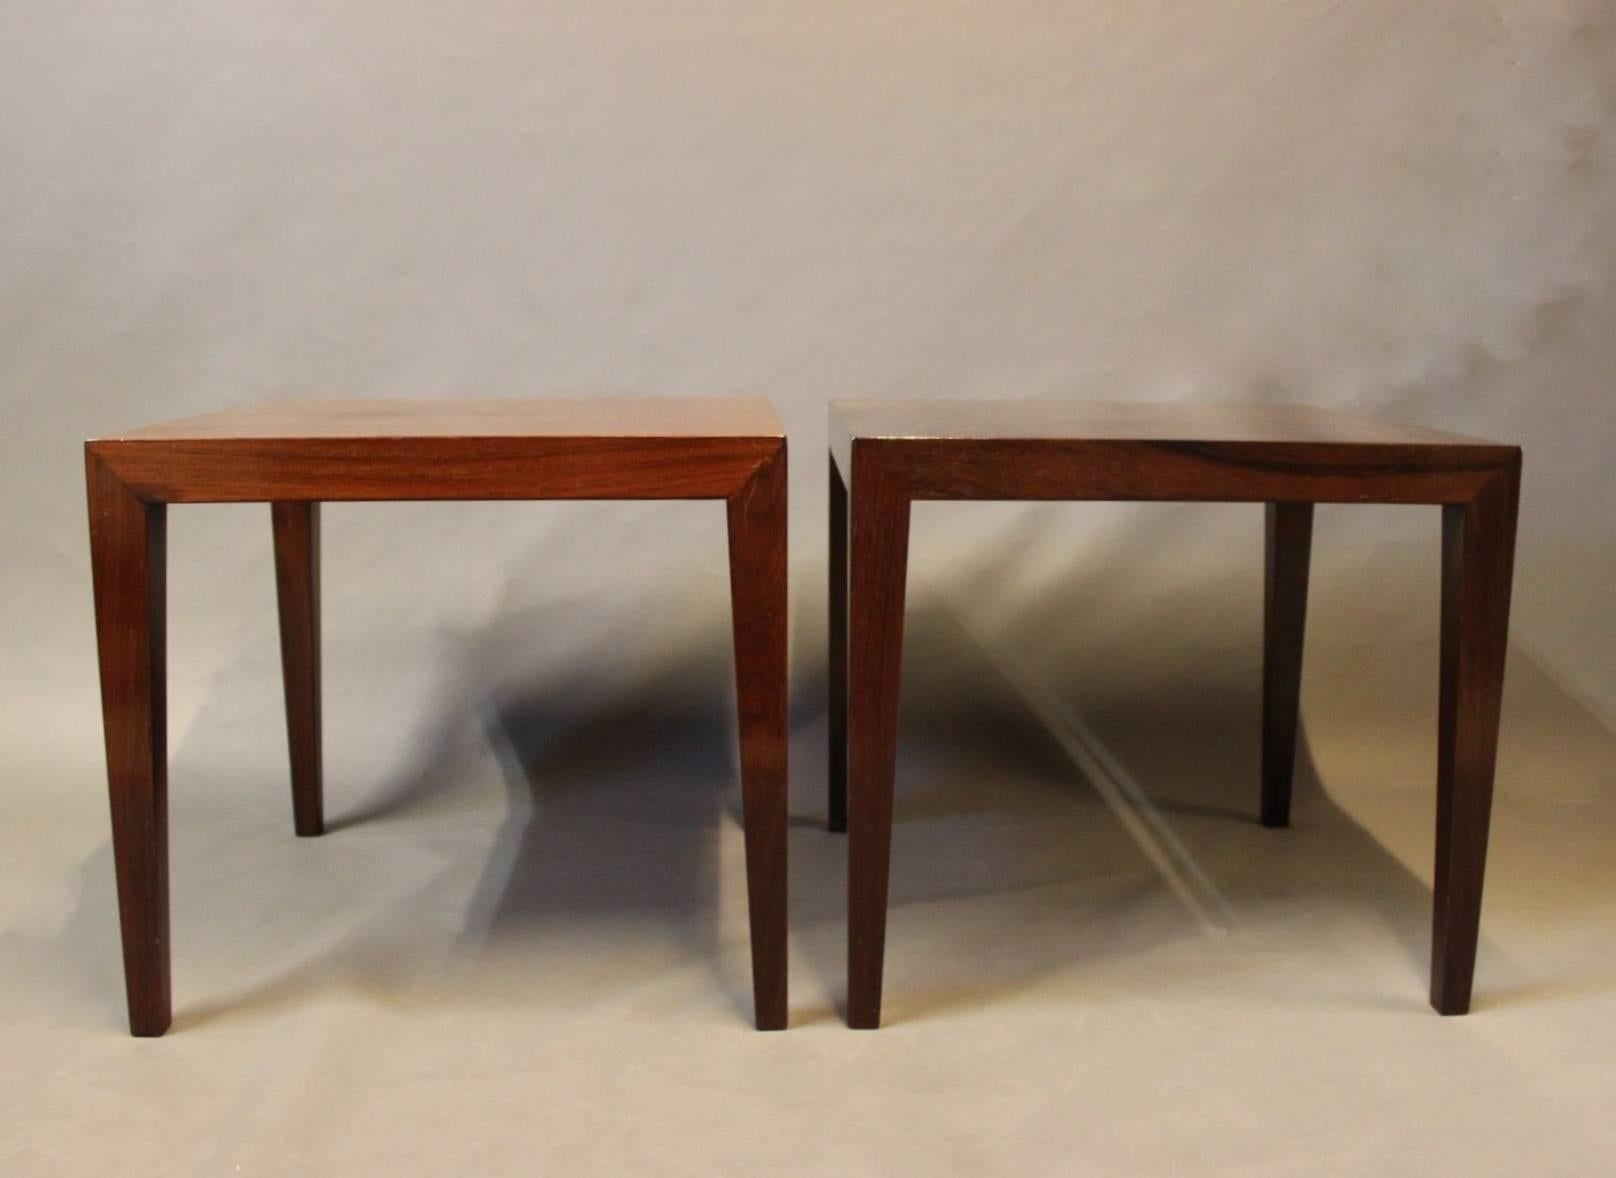 A pair of side tables in rosewood designed by Severin Hansen and manufactured by Haslev furniture factory in the 1960s.